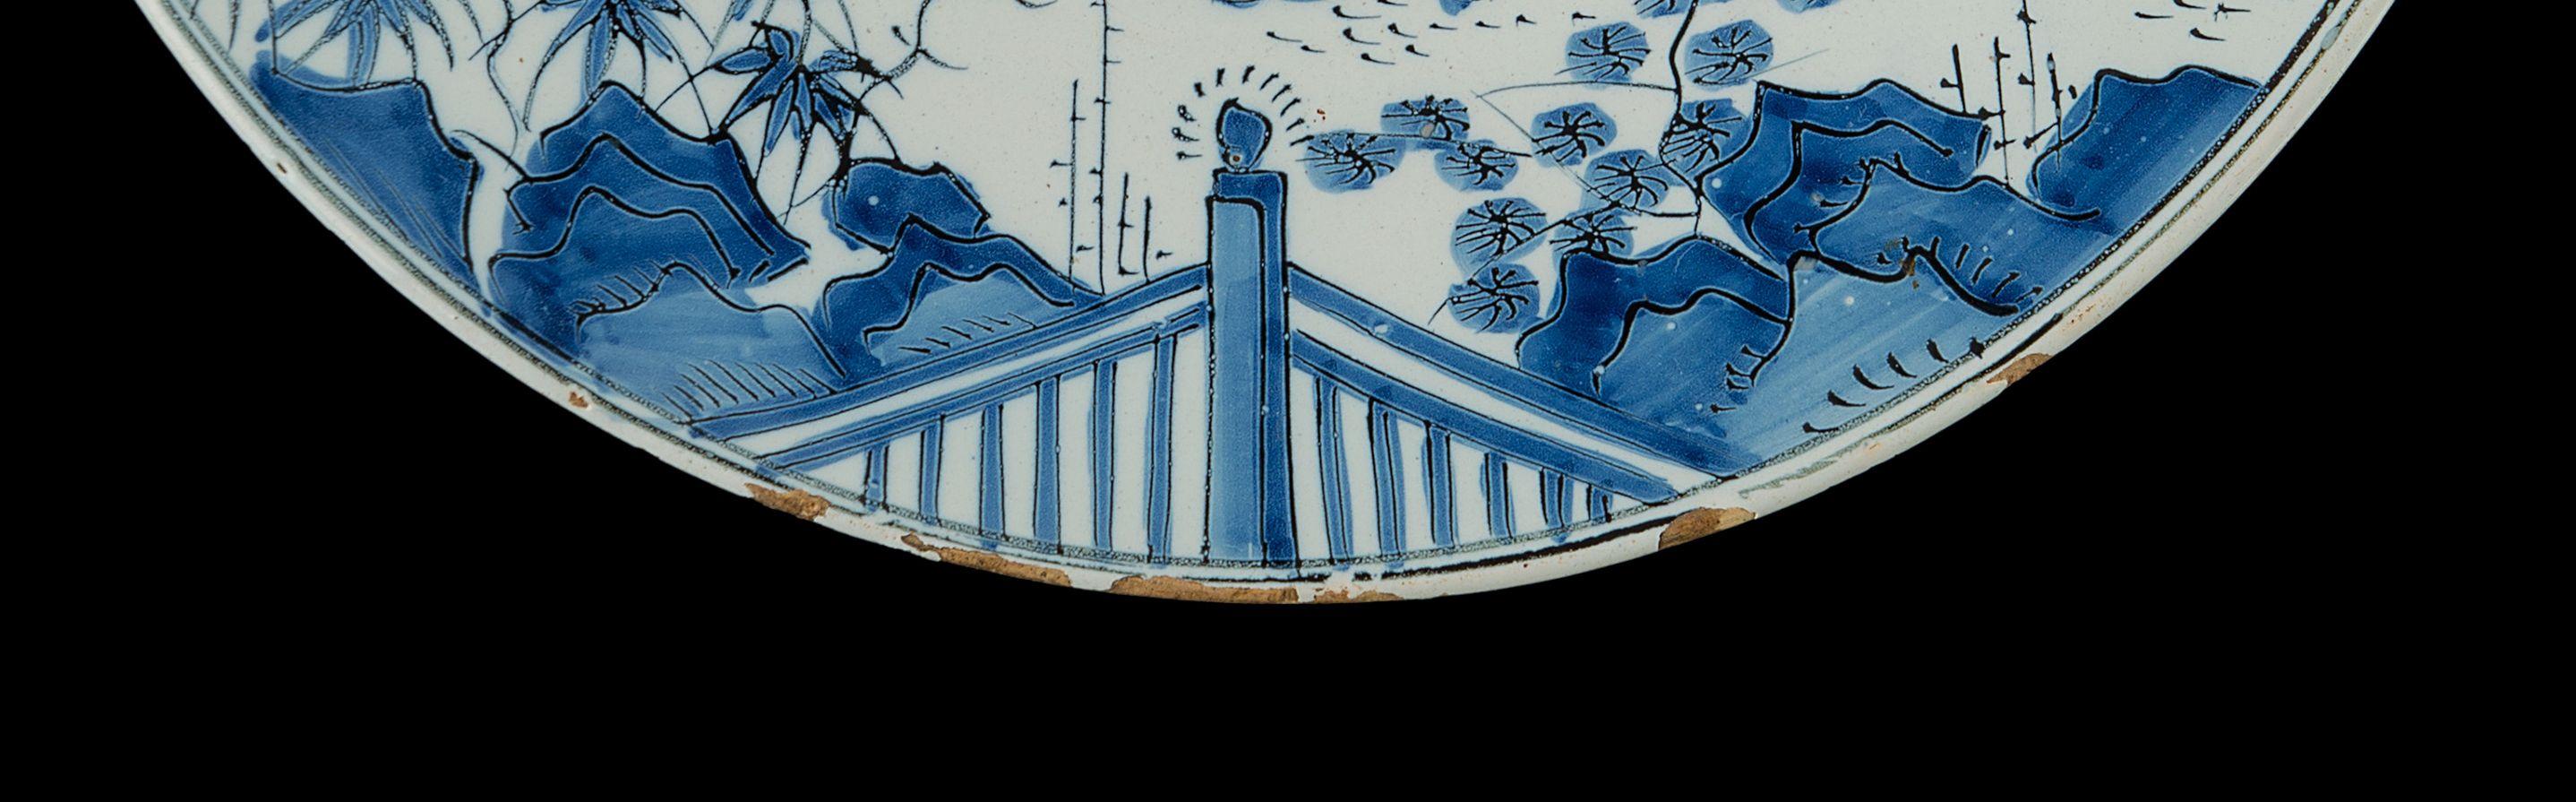 Hand-Painted Delft, Pair of Blue and White Chinoiserie Dishes, 1680 - 1700 For Sale